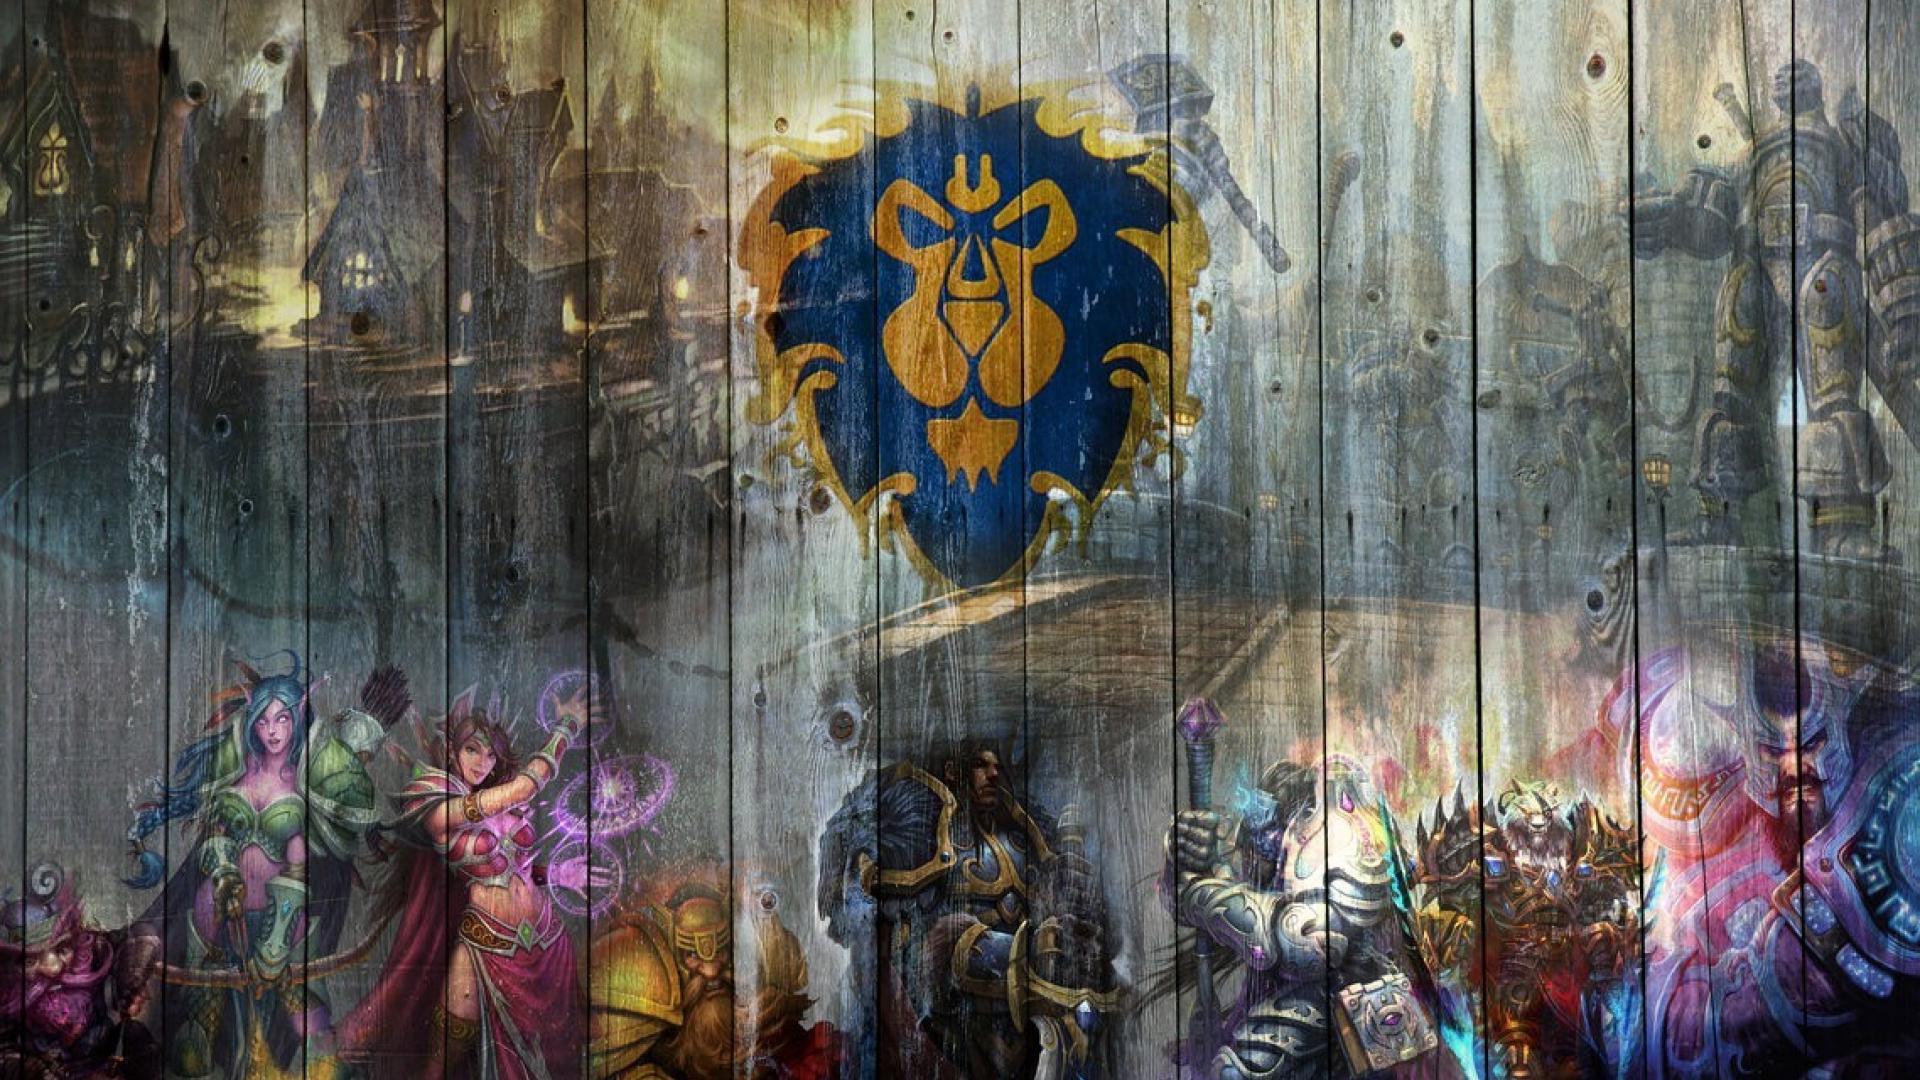 world of warcraft wallpaper horde and alliance